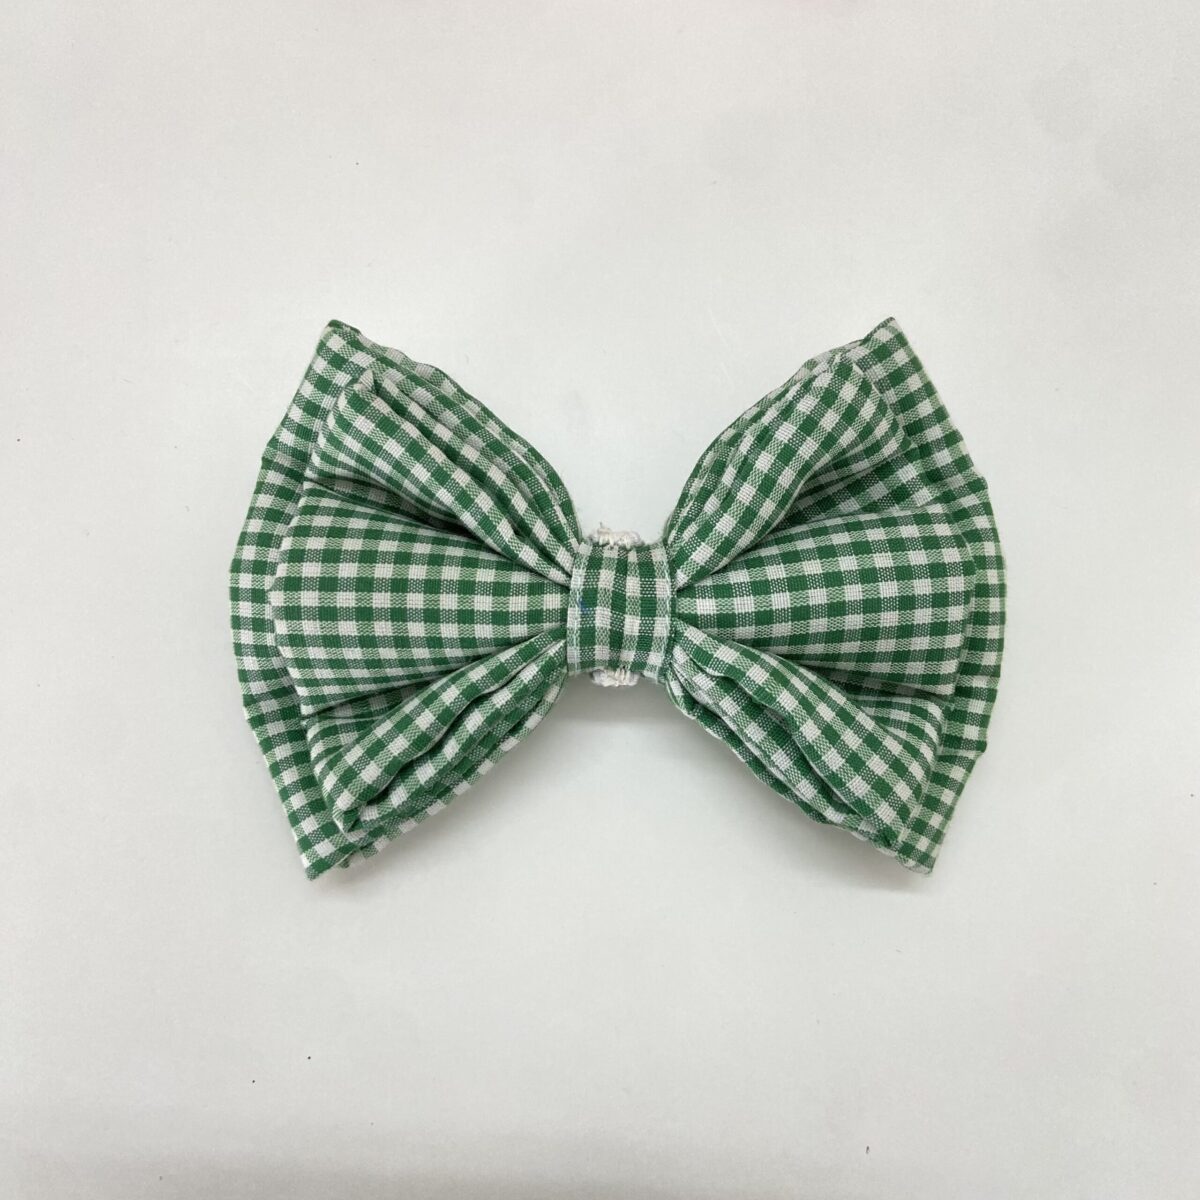 GREEN CHEEKY BOWTIE FOR DOGS